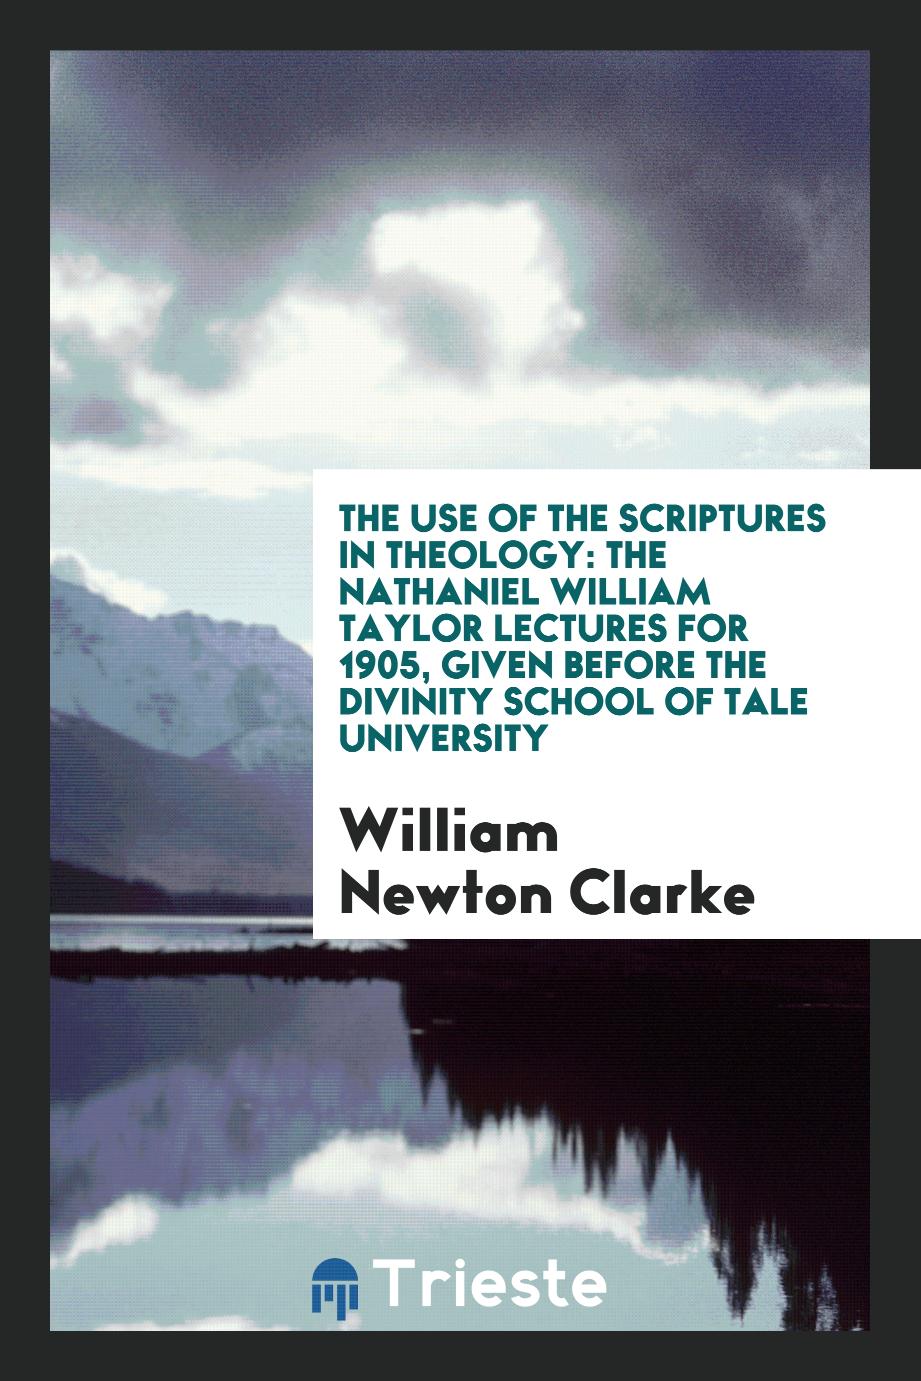 The Use of the Scriptures in Theology: The Nathaniel William Taylor Lectures for 1905, Given Before the Divinity School of Tale University